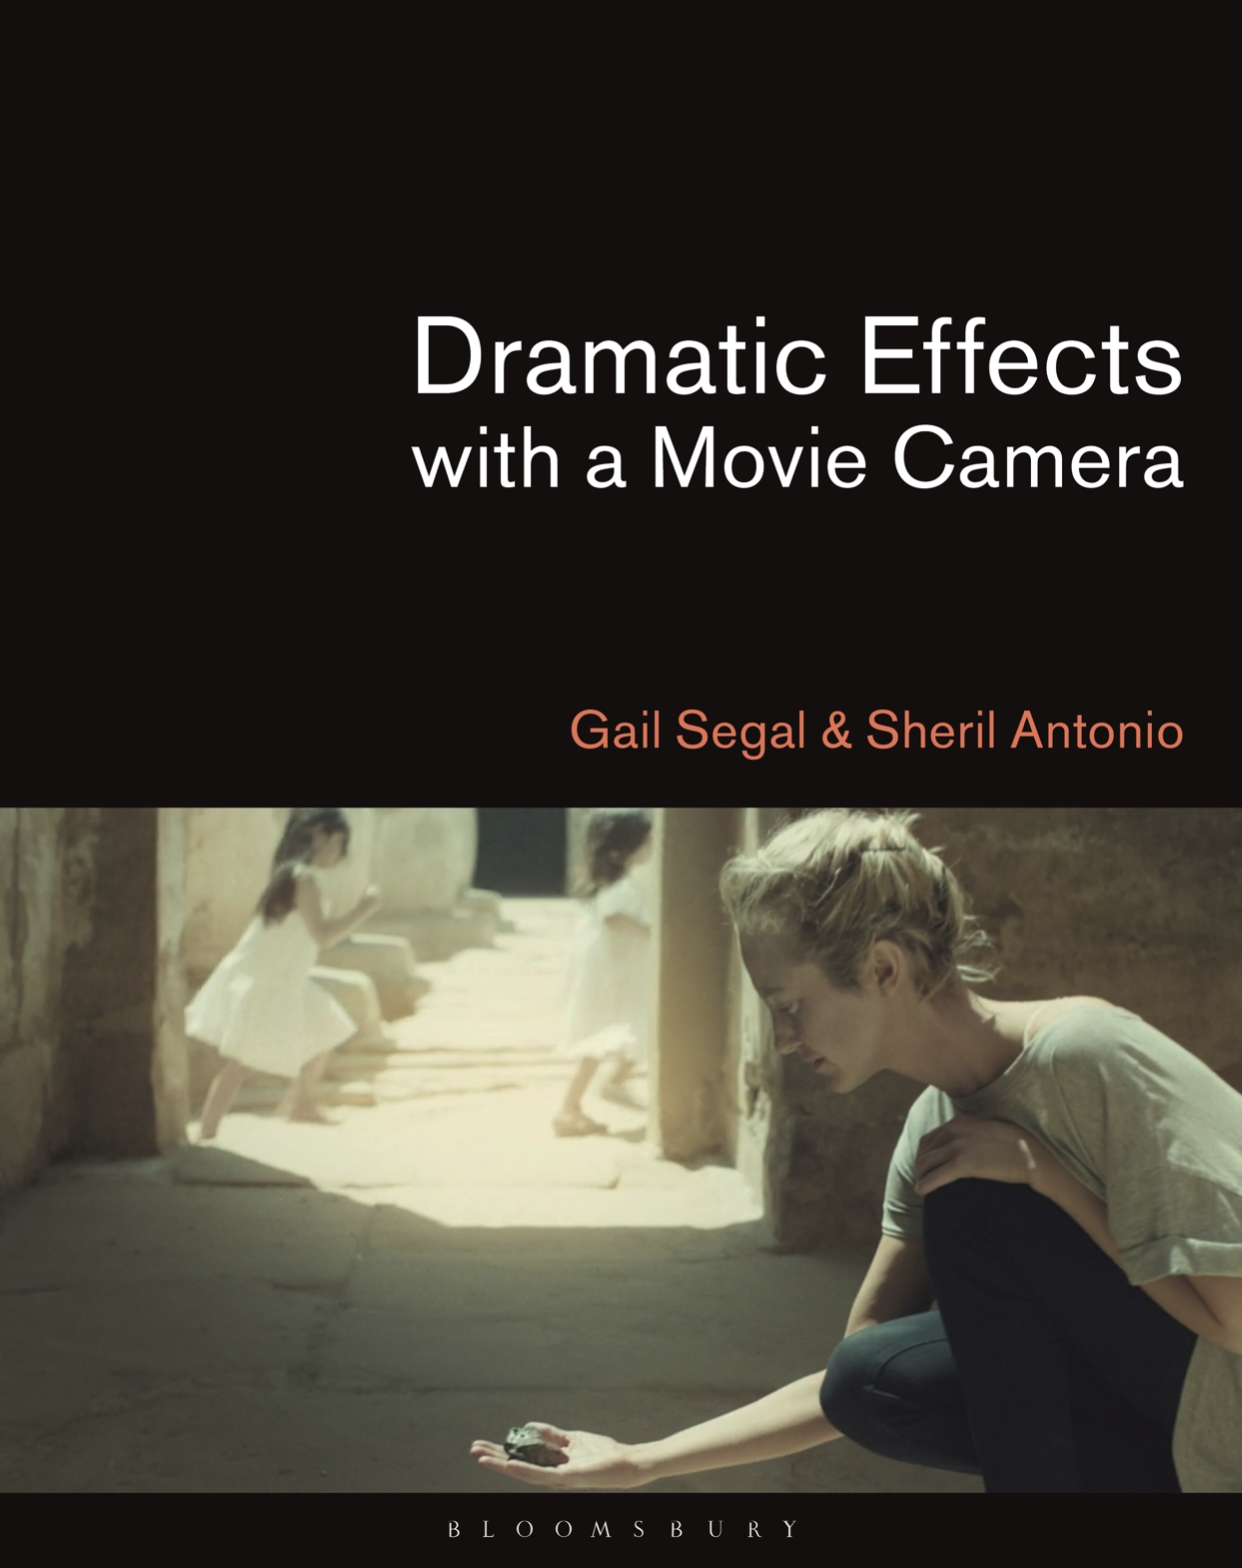 Dramatic Effects with a Movie Camera book cover